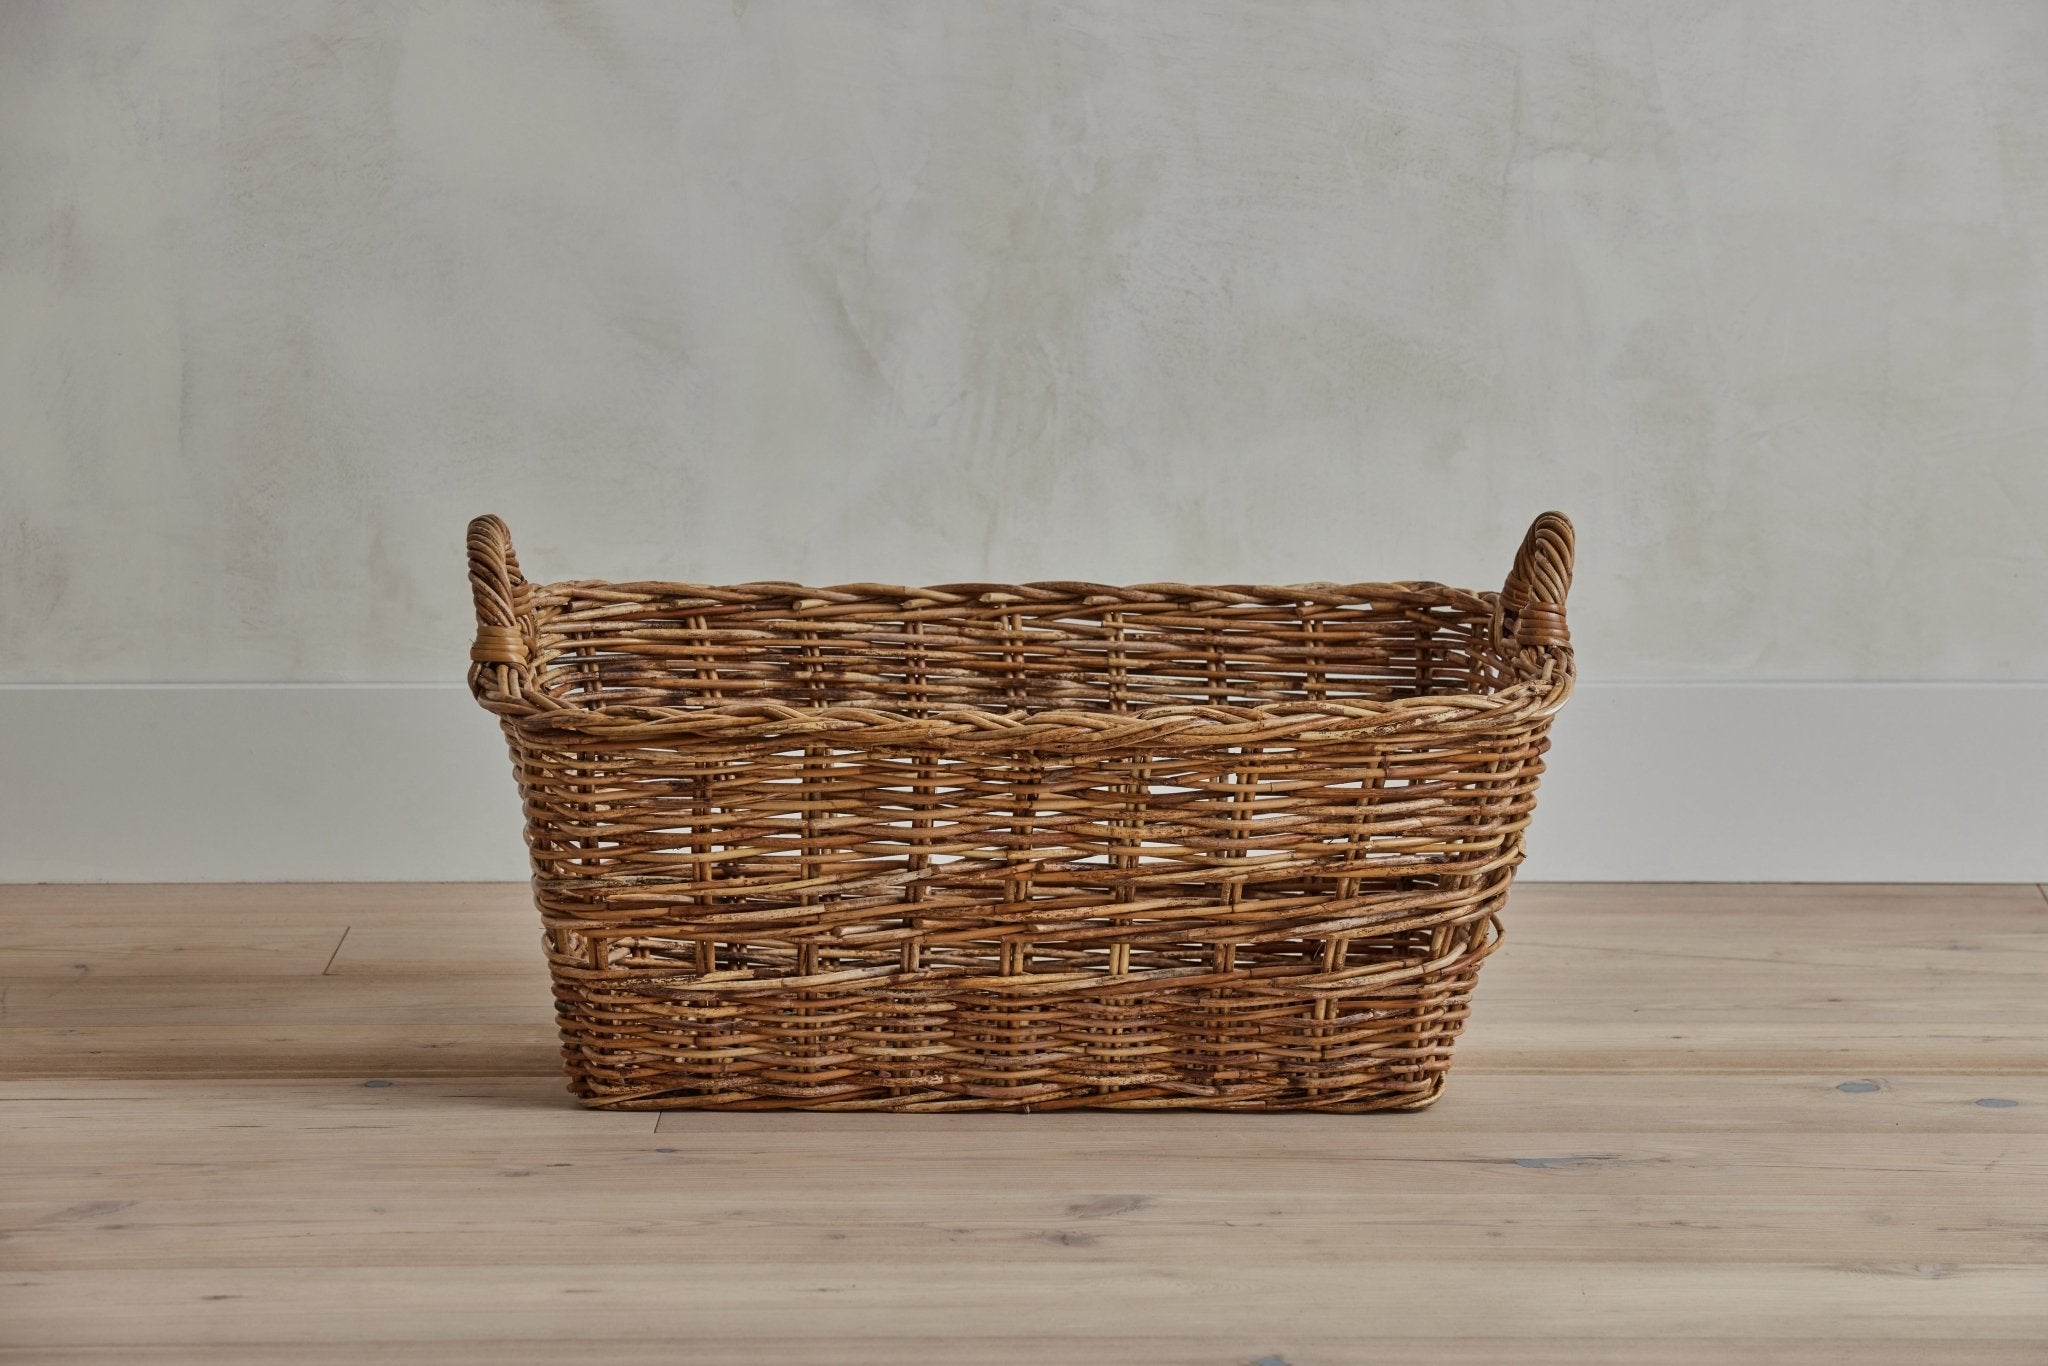 French Country Laundry Basket - Nickey Kehoe